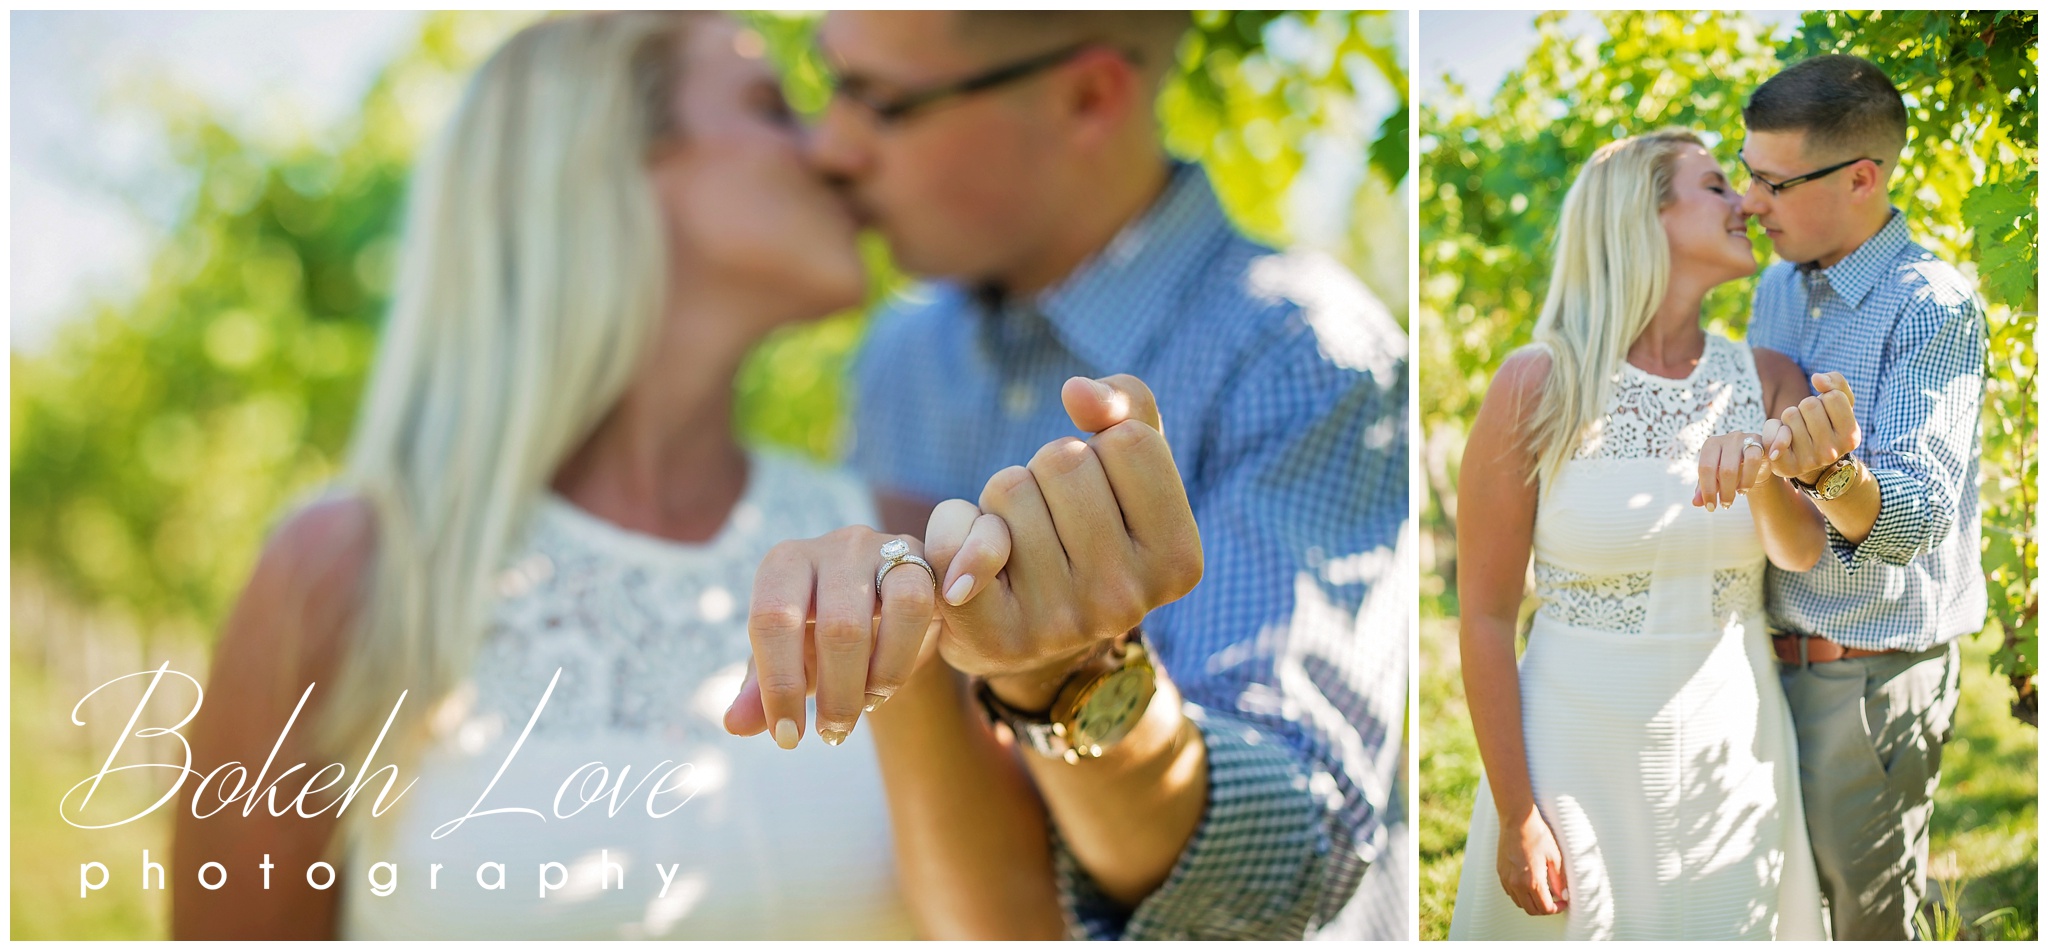 Cape May Winery Proposal, Bokeh Love Photography, Cape May Wedding Photographer